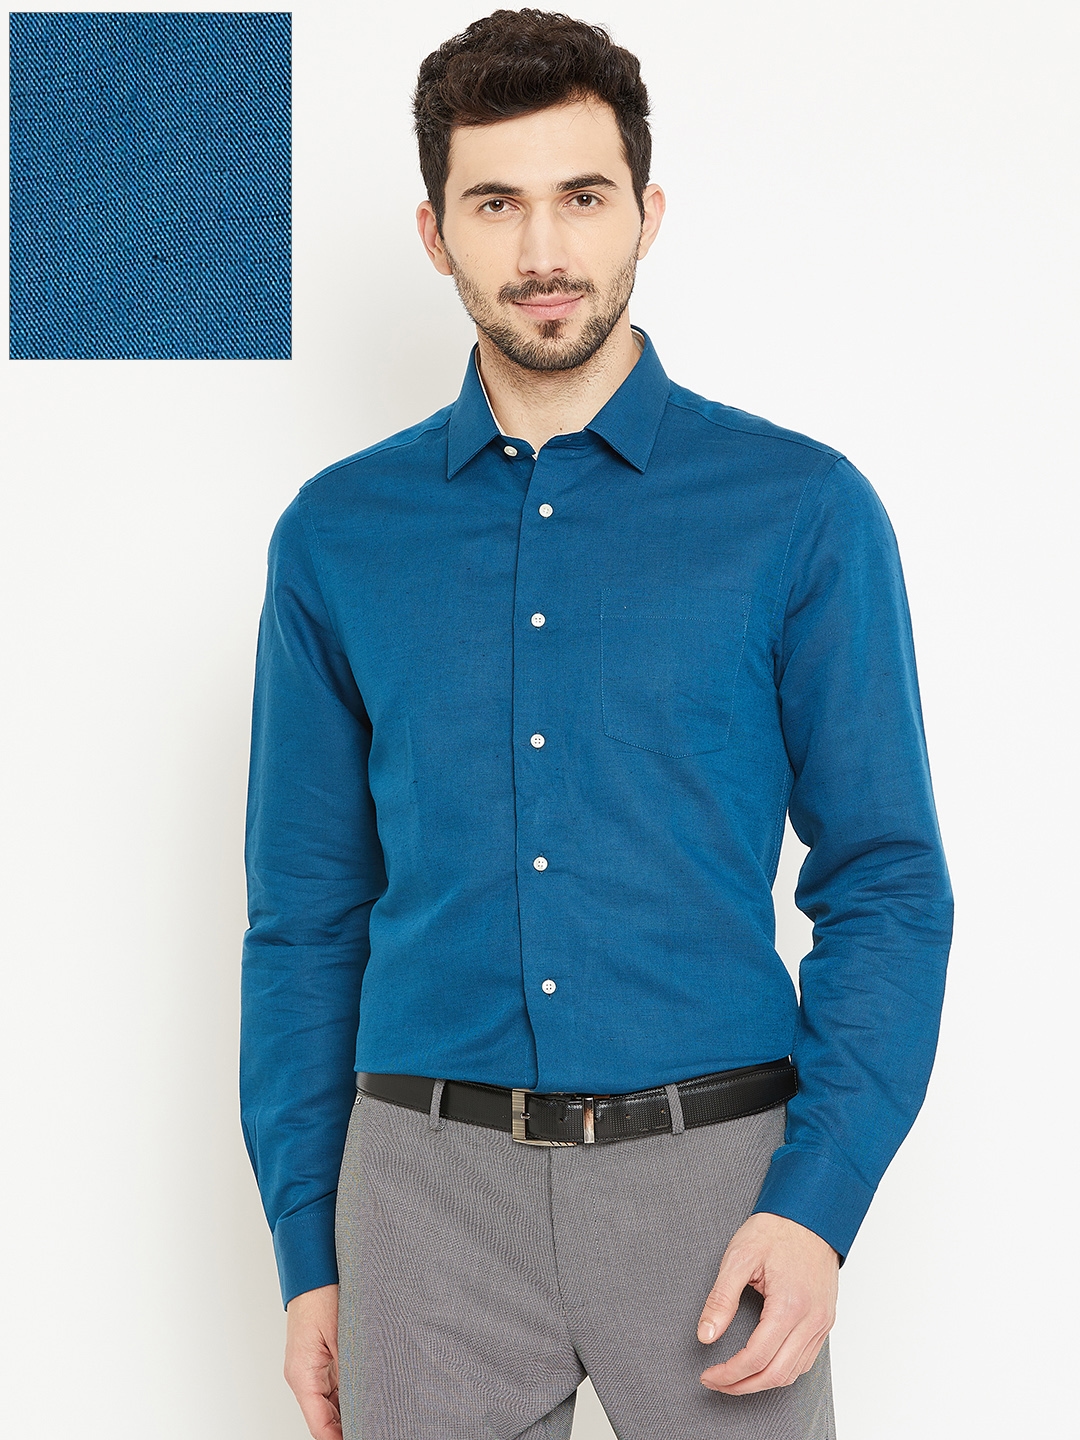 buy > teal blue shirt, Up to 61% OFF